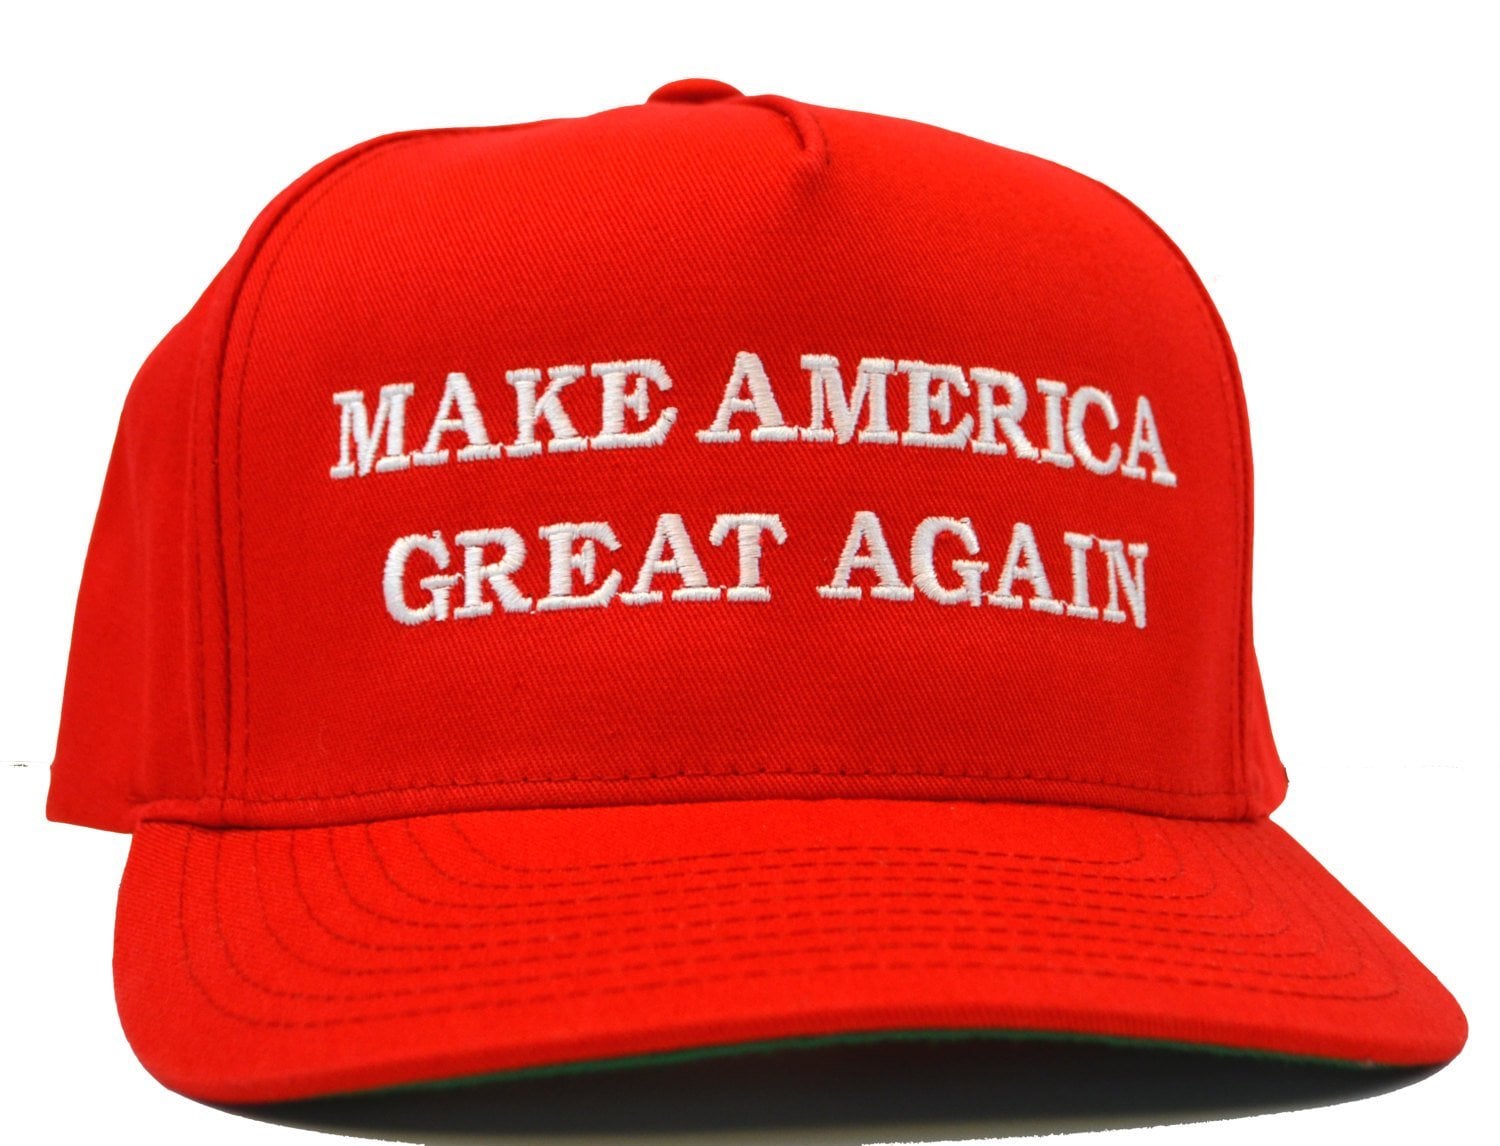 teen-defends-attacking-classmate-for-wearing-racist-maga-hat-todd